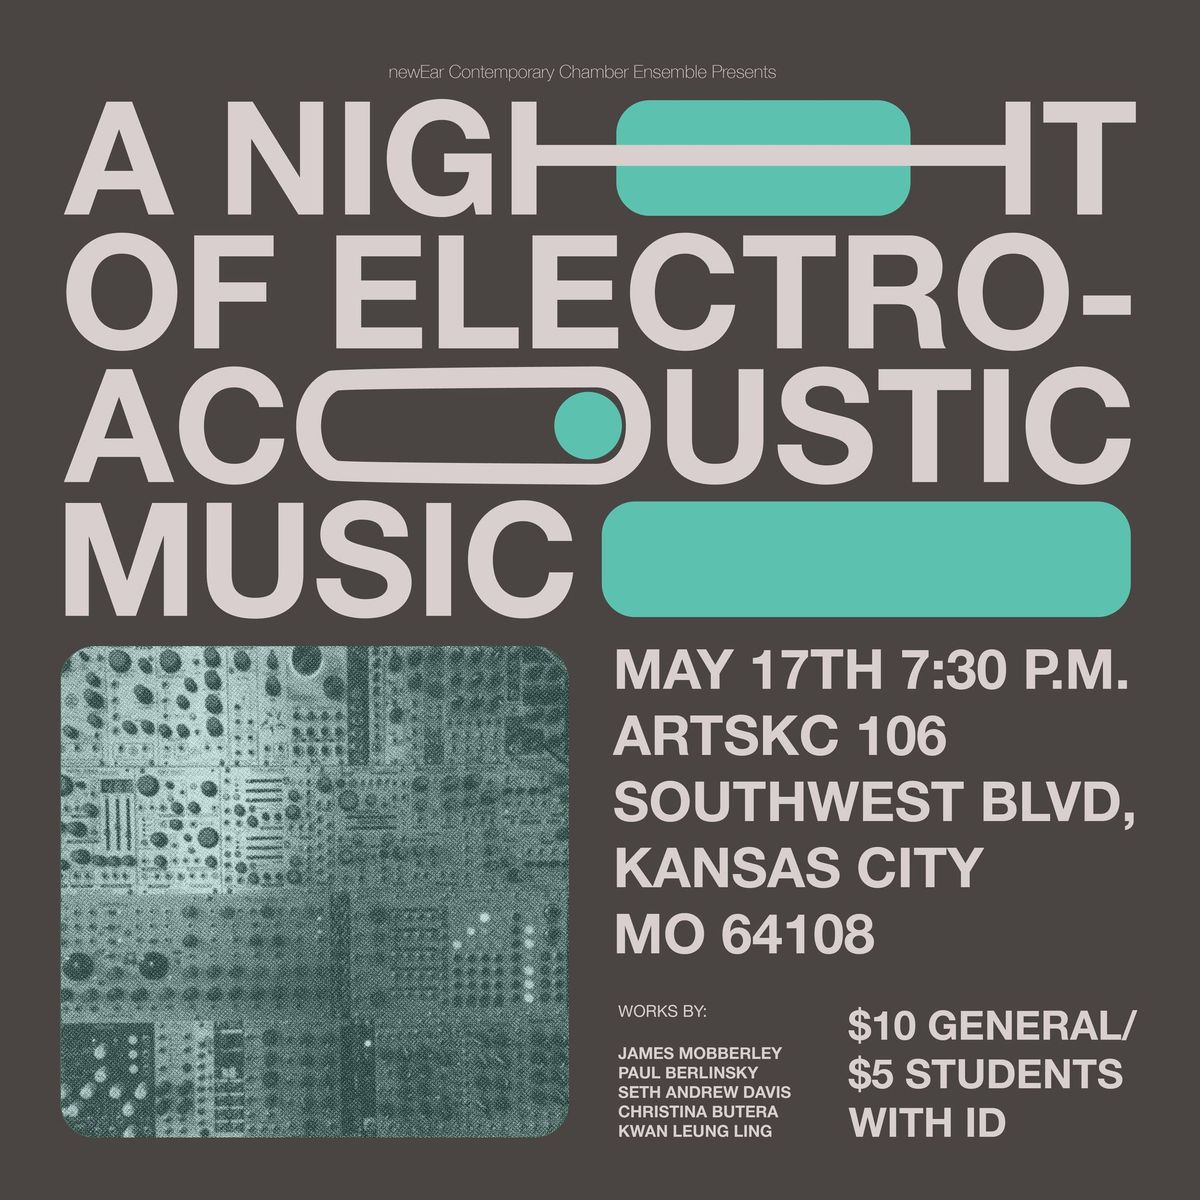 newEar Presents: A Night of Electroacoustic Music